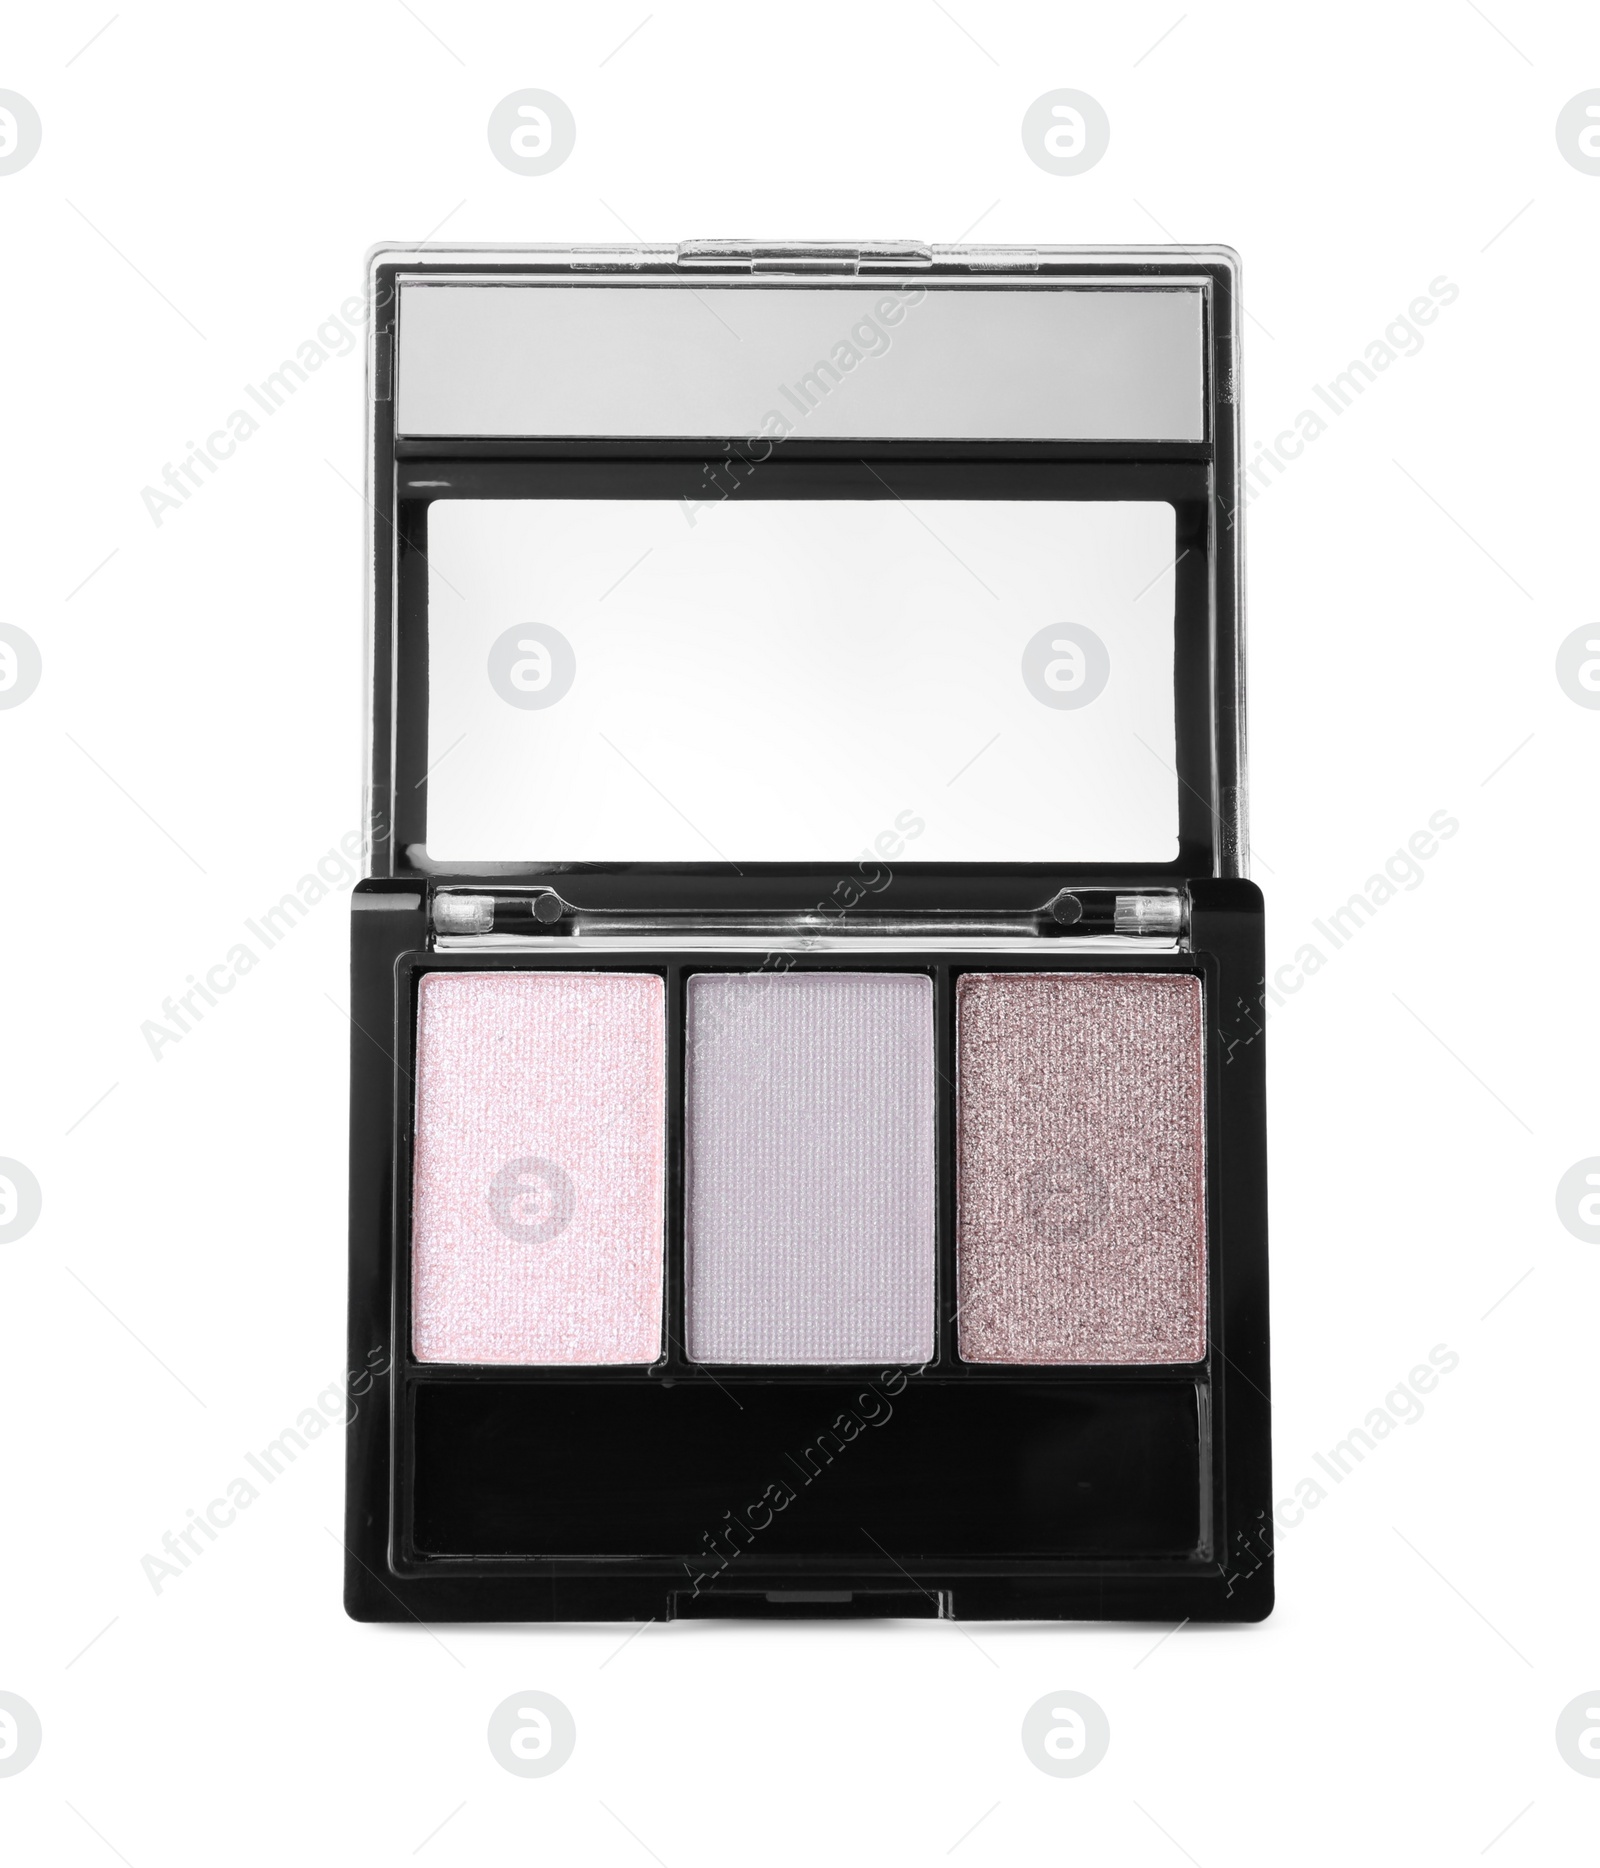 Photo of Eye shadow palette isolated on white. Makeup product